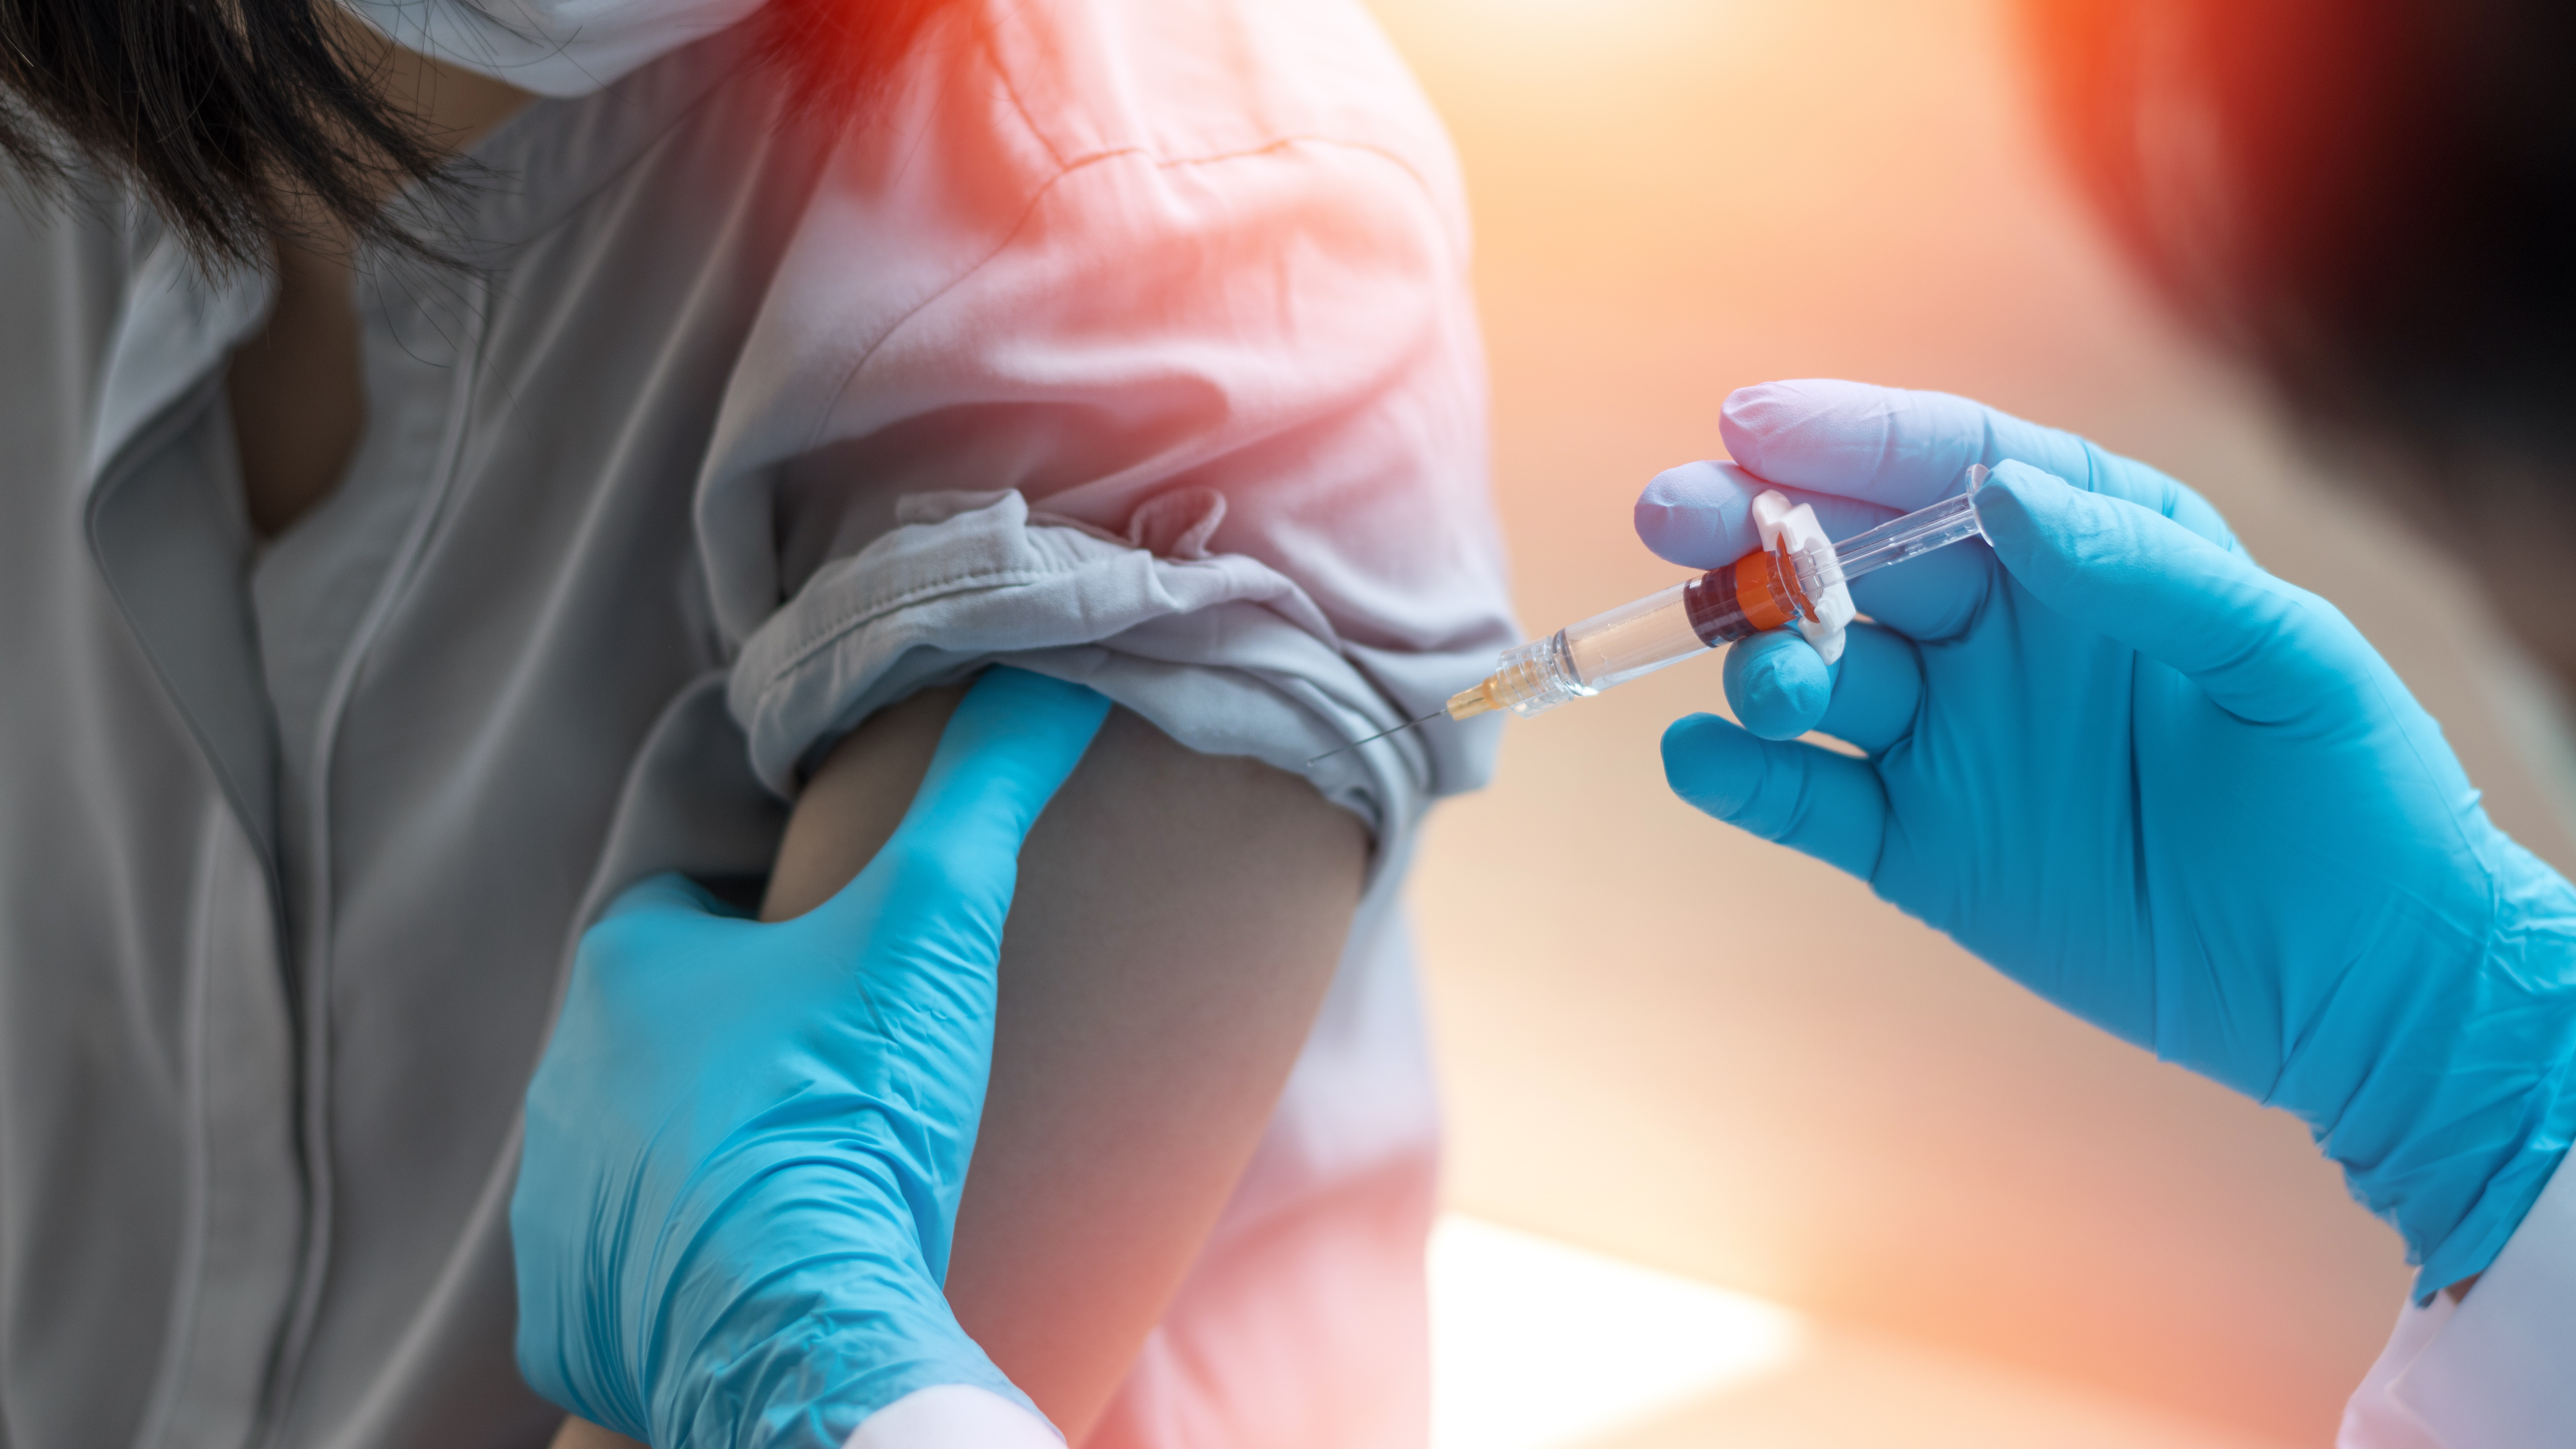 Image of two gloved hands, one hold a patient's arm and the other holding a syringe.